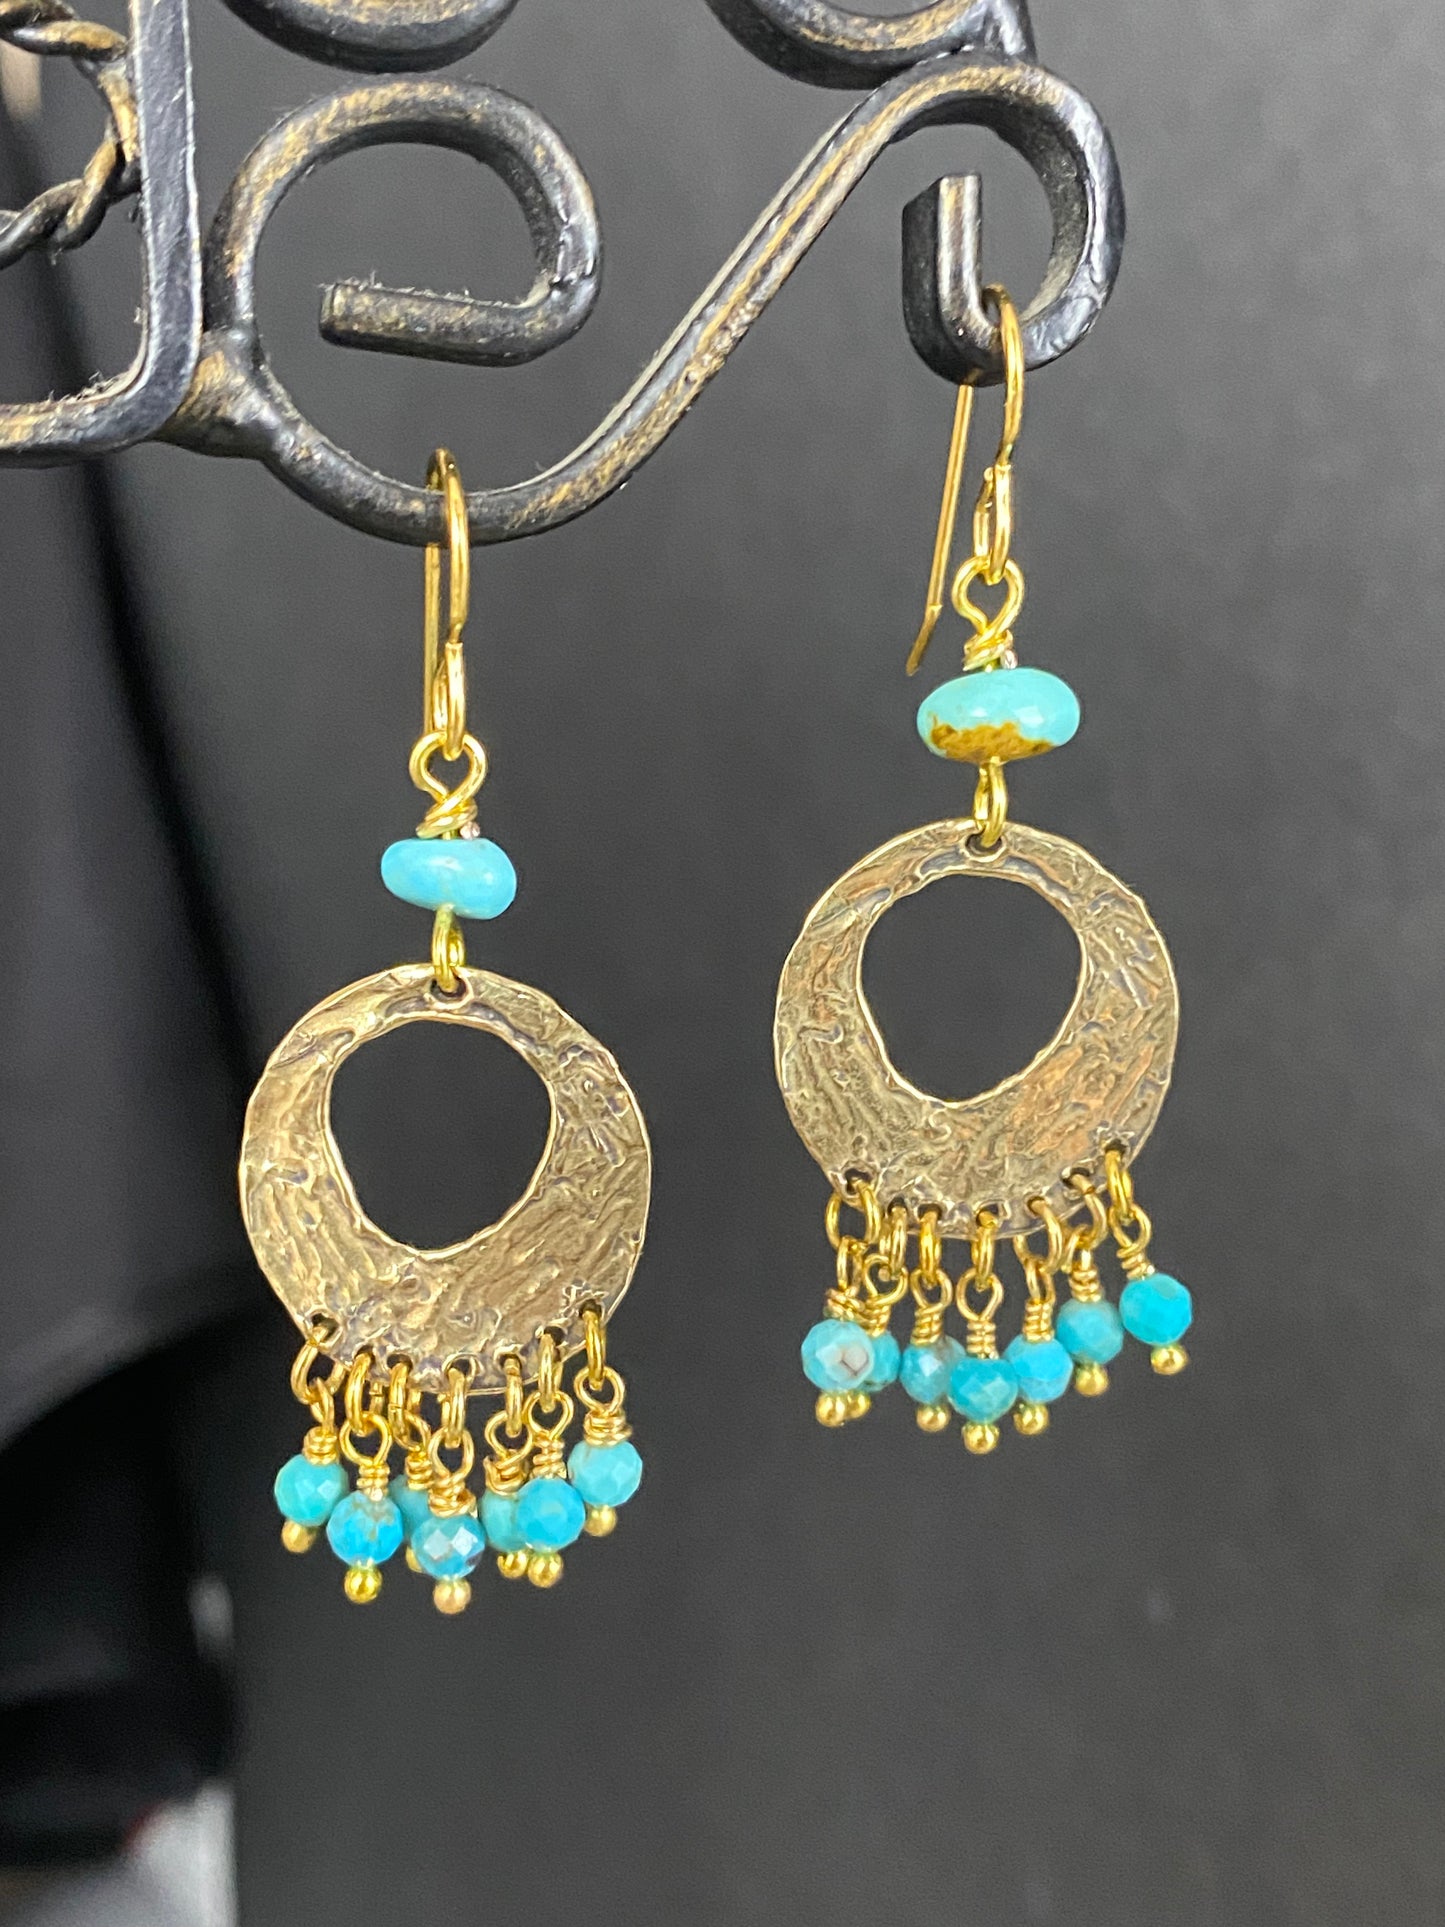 Gold hammered hoops, turquoise stone, earrings, jewelry